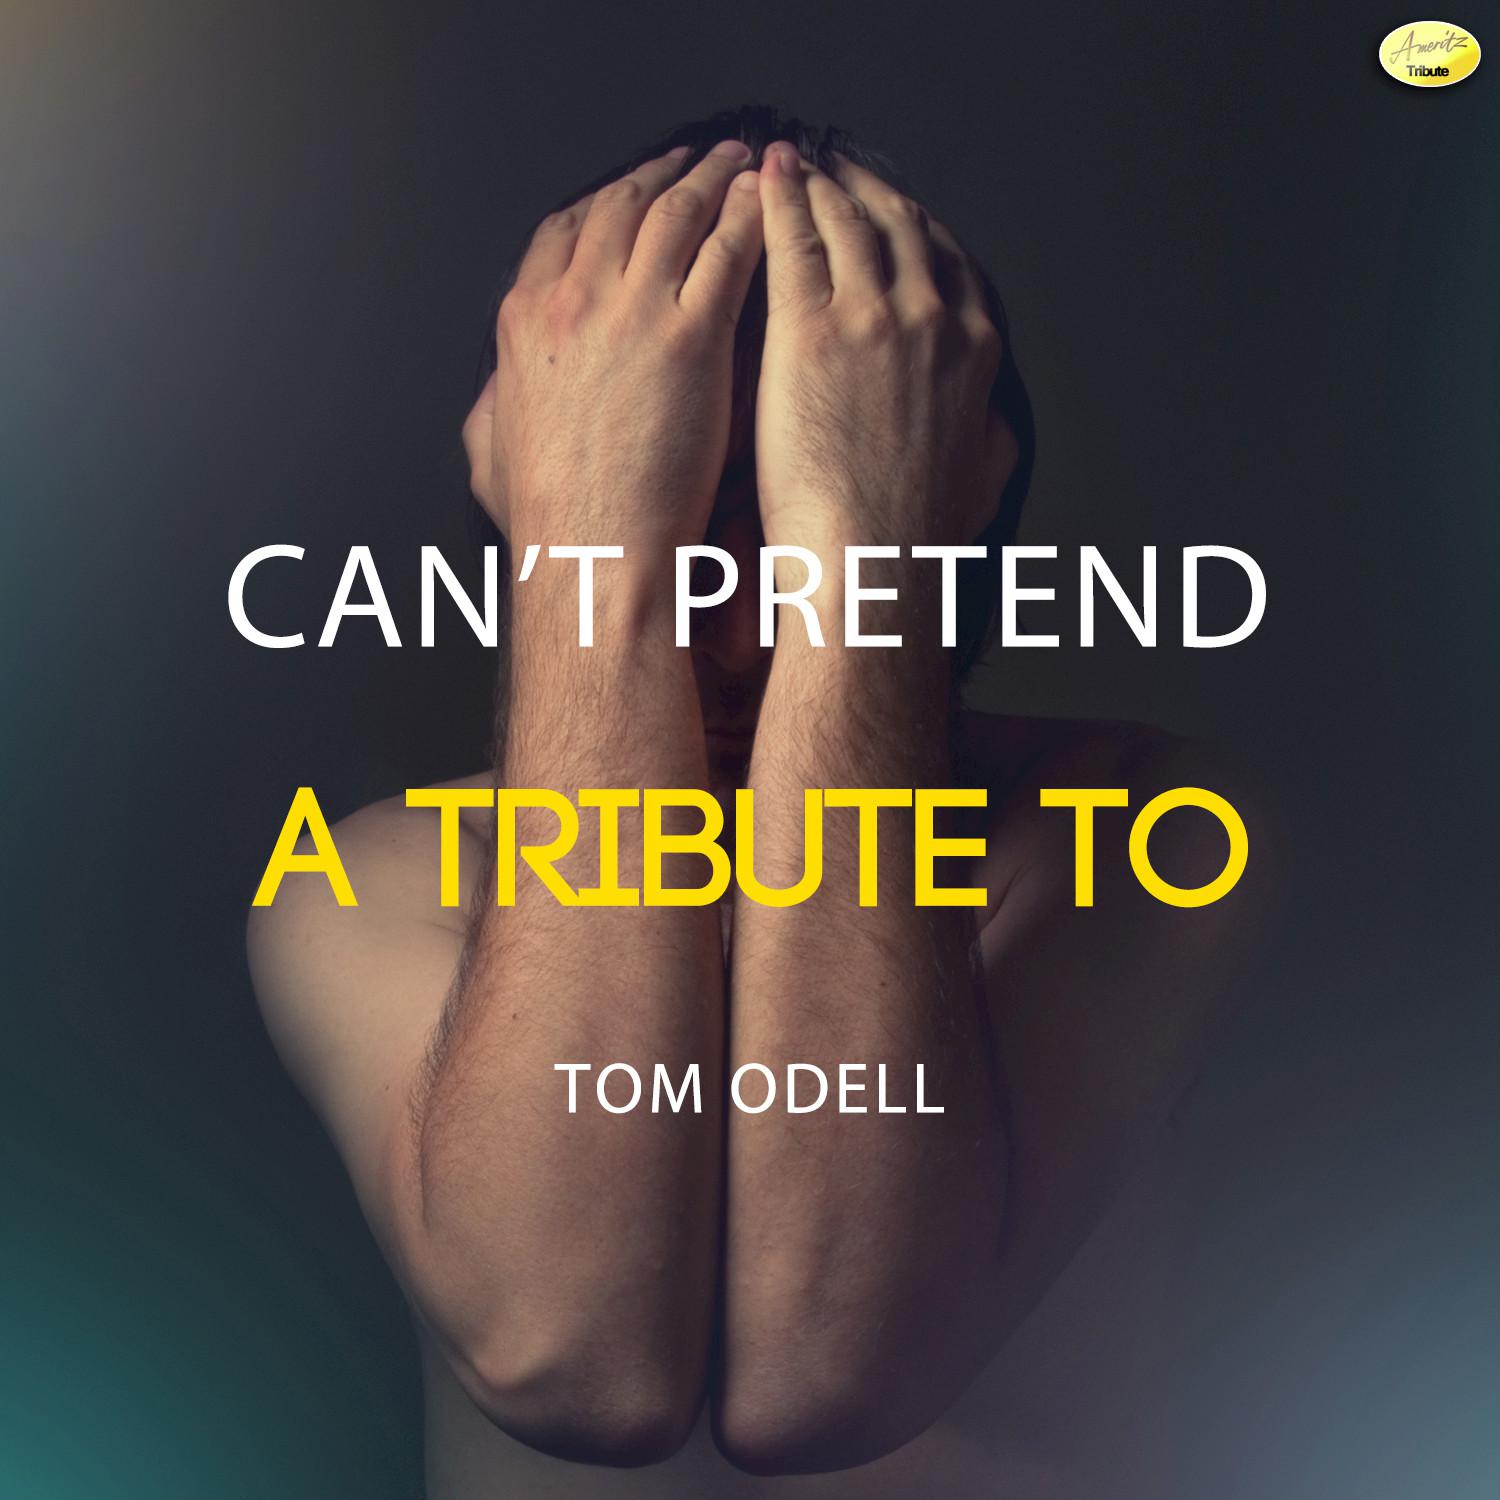 Can't Pretend - A Tribute to Tom Odell